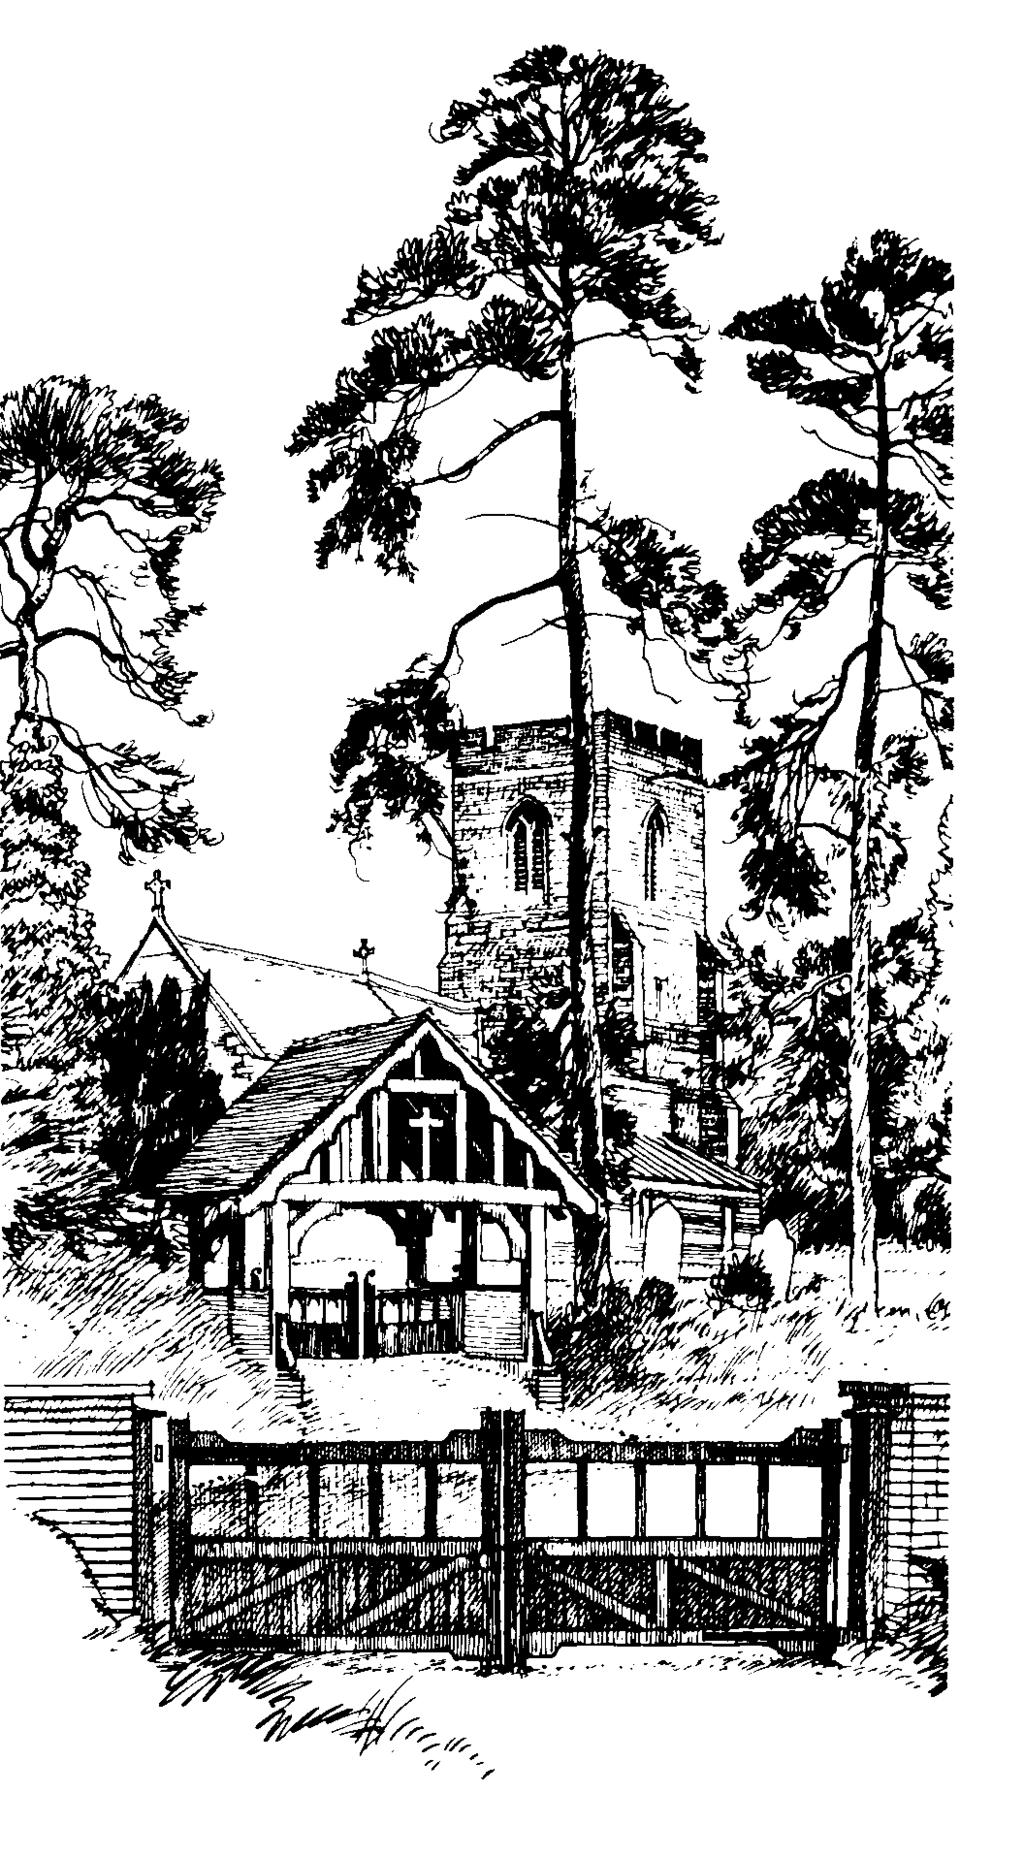 THE STORY OF THE PARISH CHURCH OF ST PETER & ST PAUL FLITWICK FOREWORD I am pleased to contribute a few words of introduction to this second edition of the History of Flitwick Parish Church.